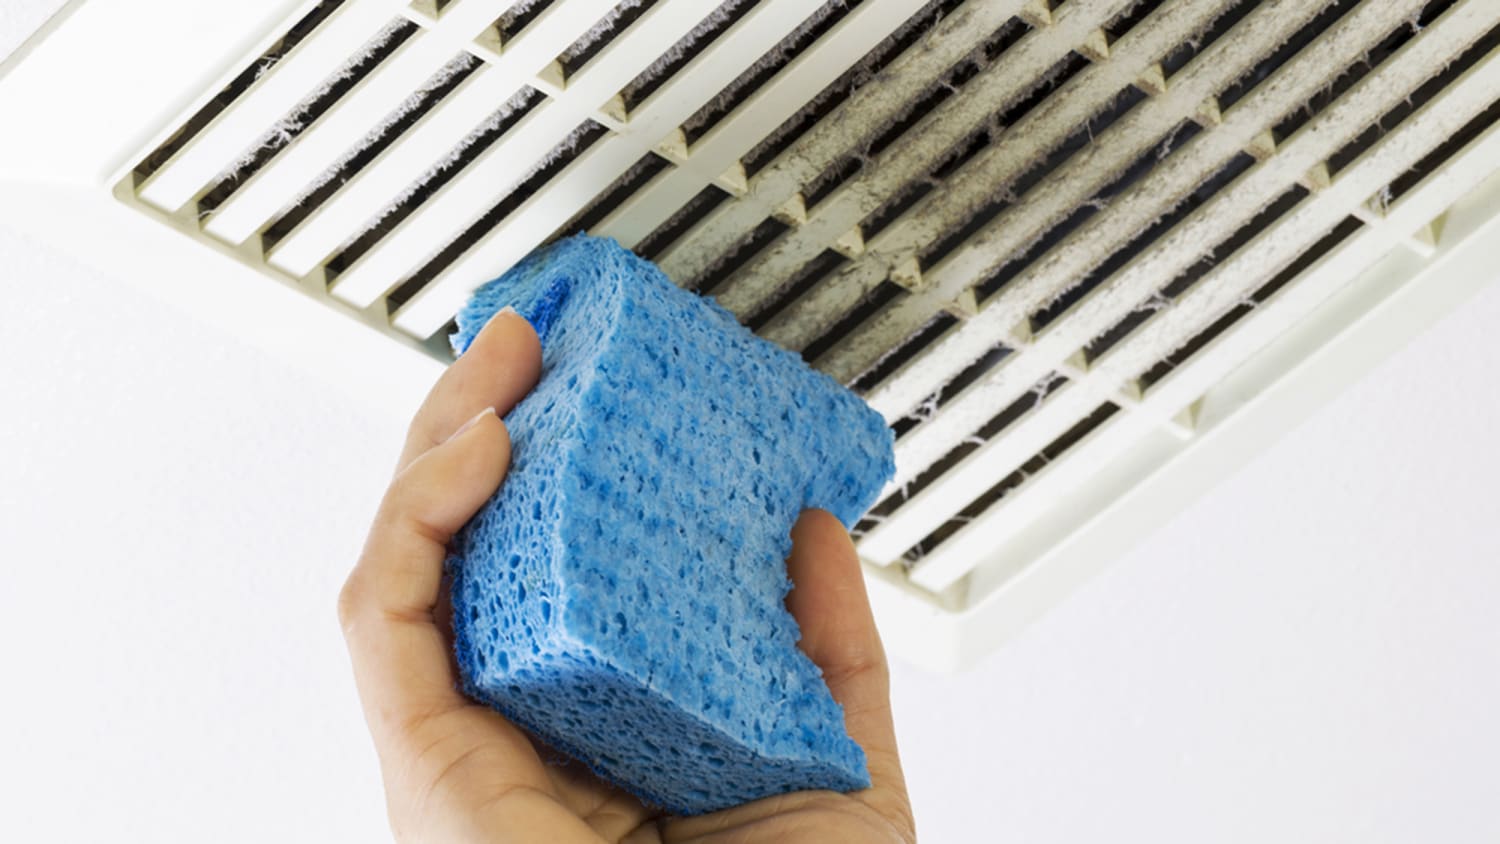 How to clean vent covers - TODAY.com